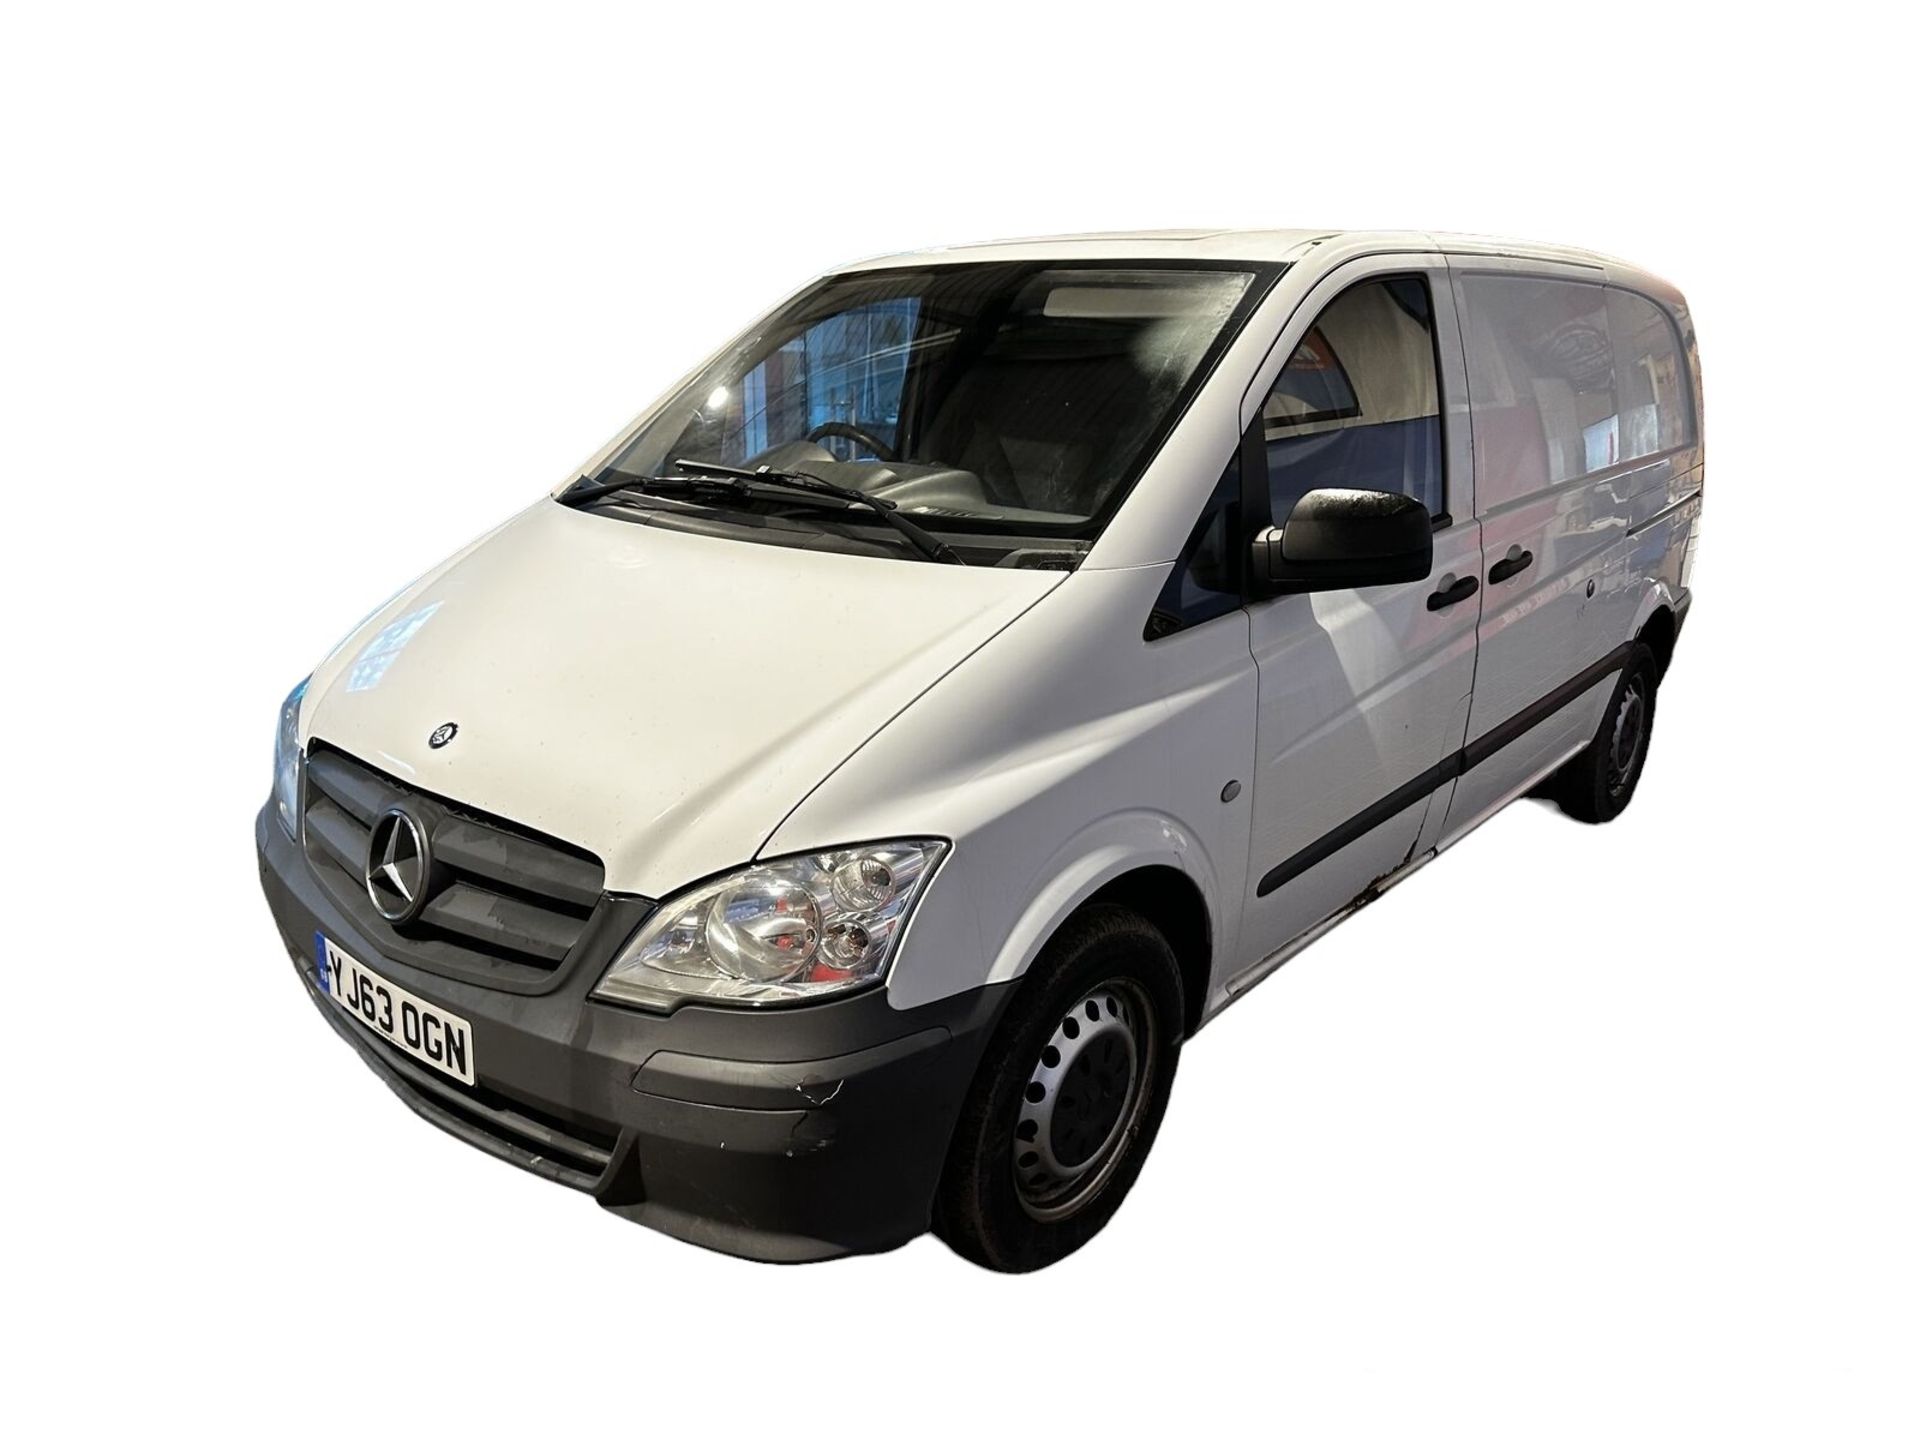 63 PLATE MERCEDES-BENZ VITO LONG DIESEL: READY FOR ACTION >>--NO VAT ON HAMMER--<<